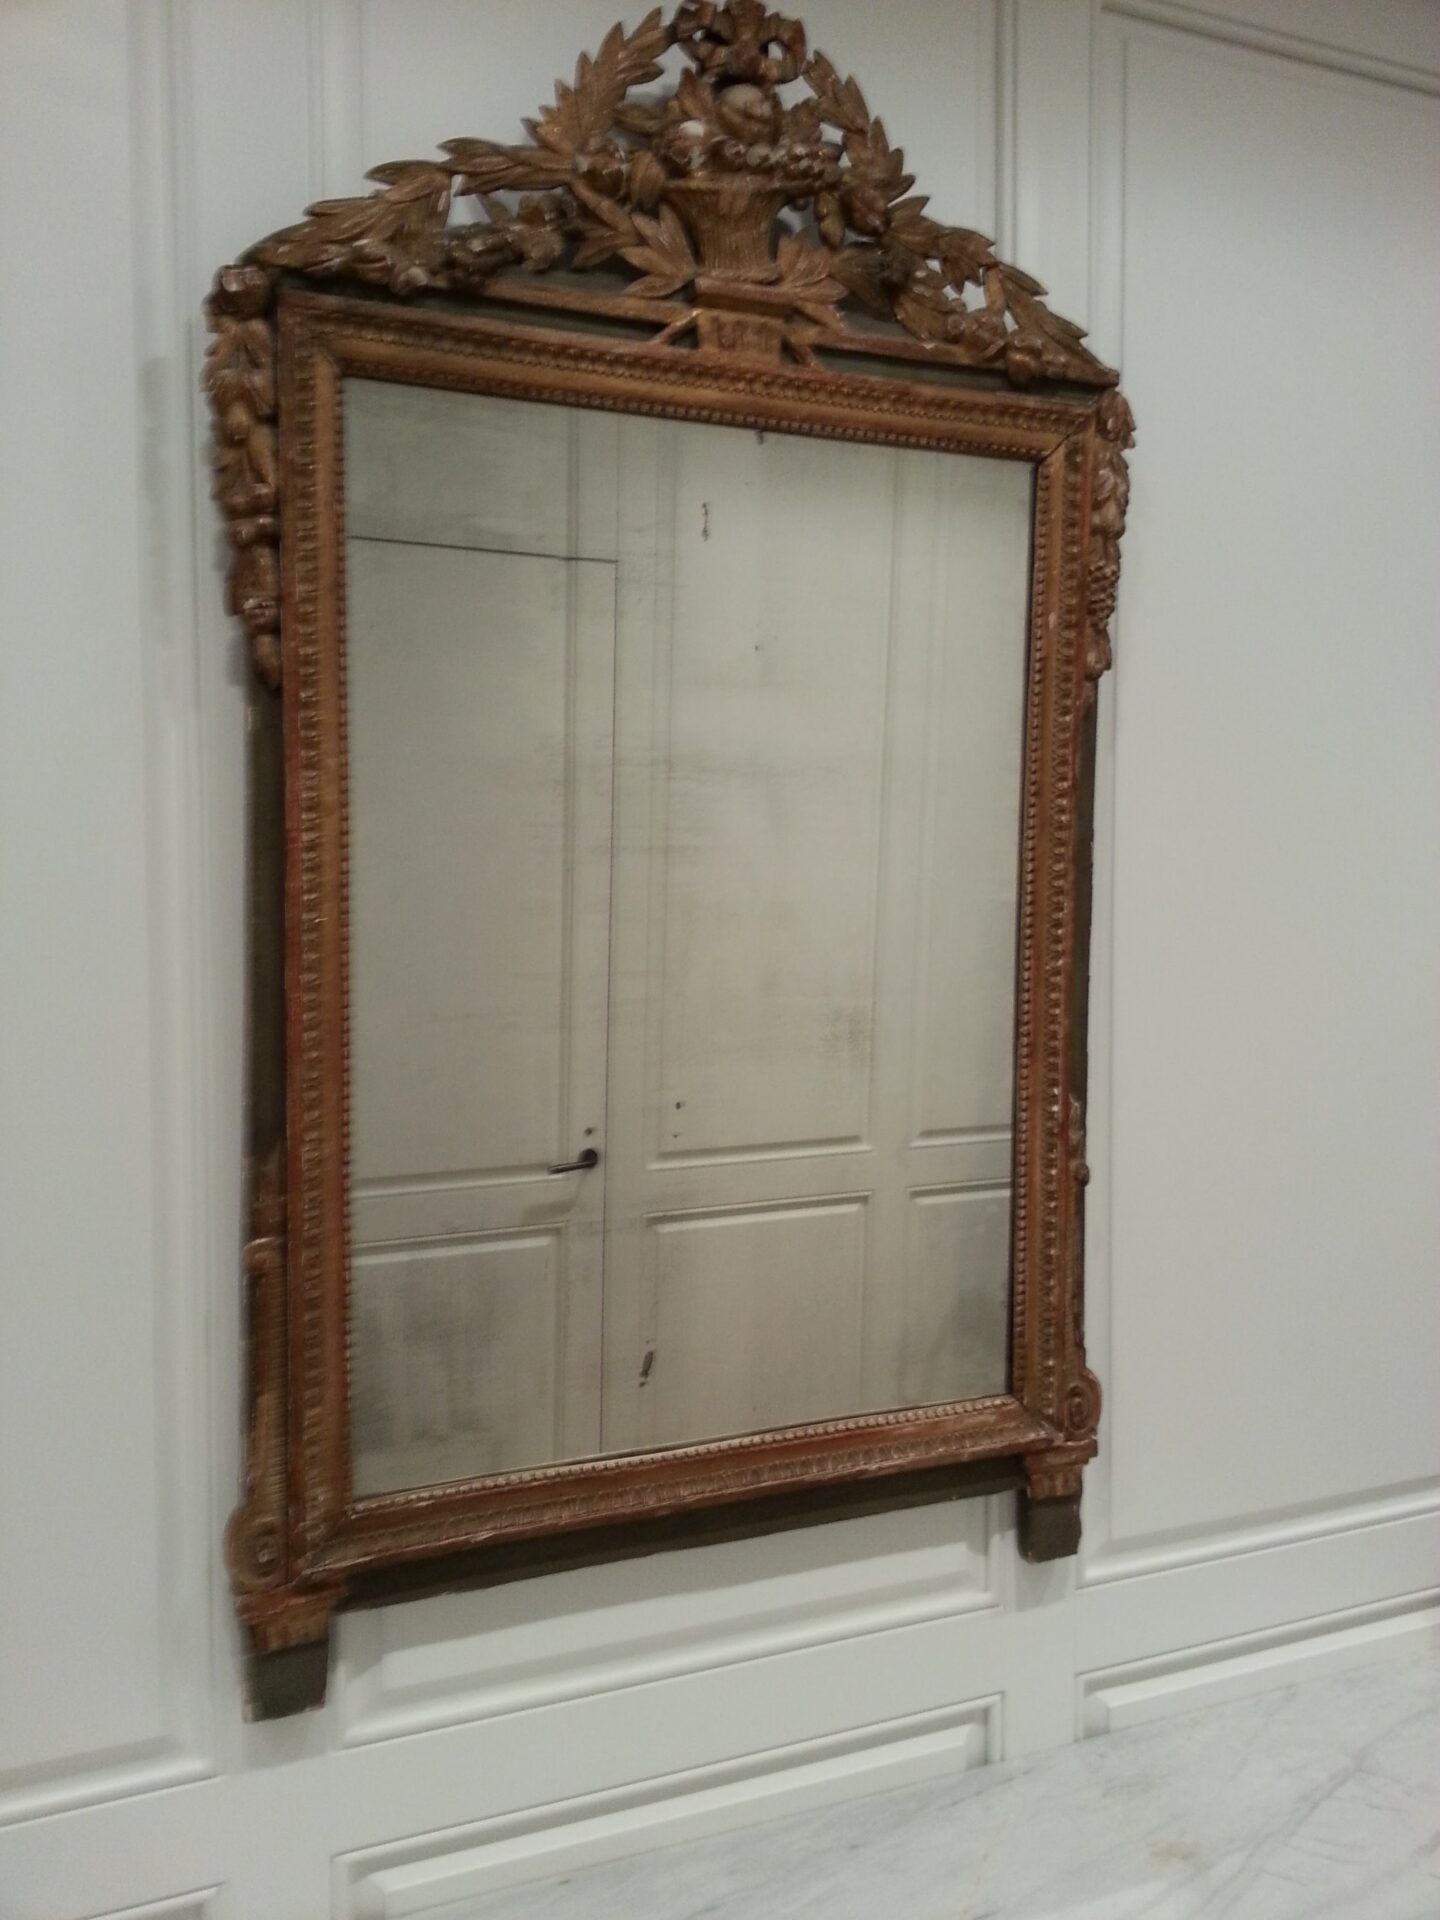 A mirror hanging on the wall in front of a white wall.